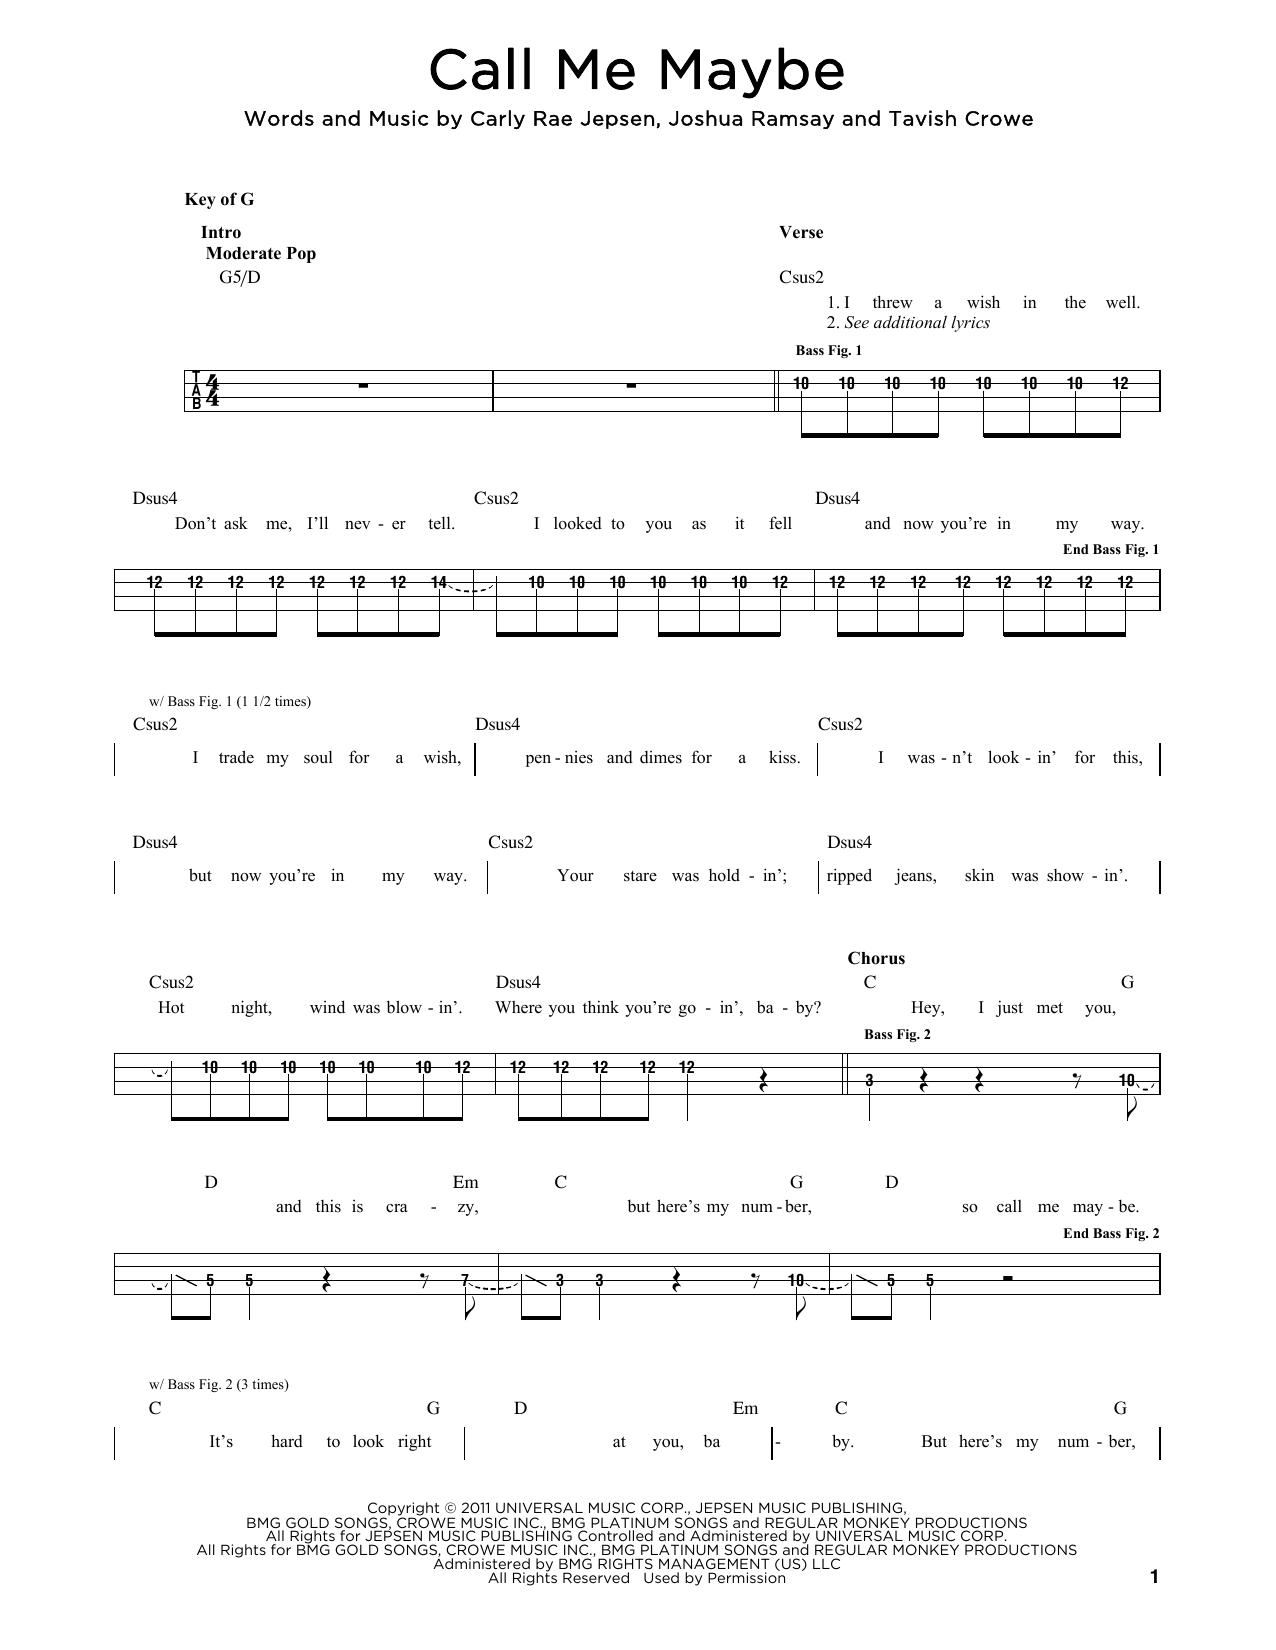 Carly Rae Jepsen Call Me Maybe sheet music notes and chords. Download Printable PDF.